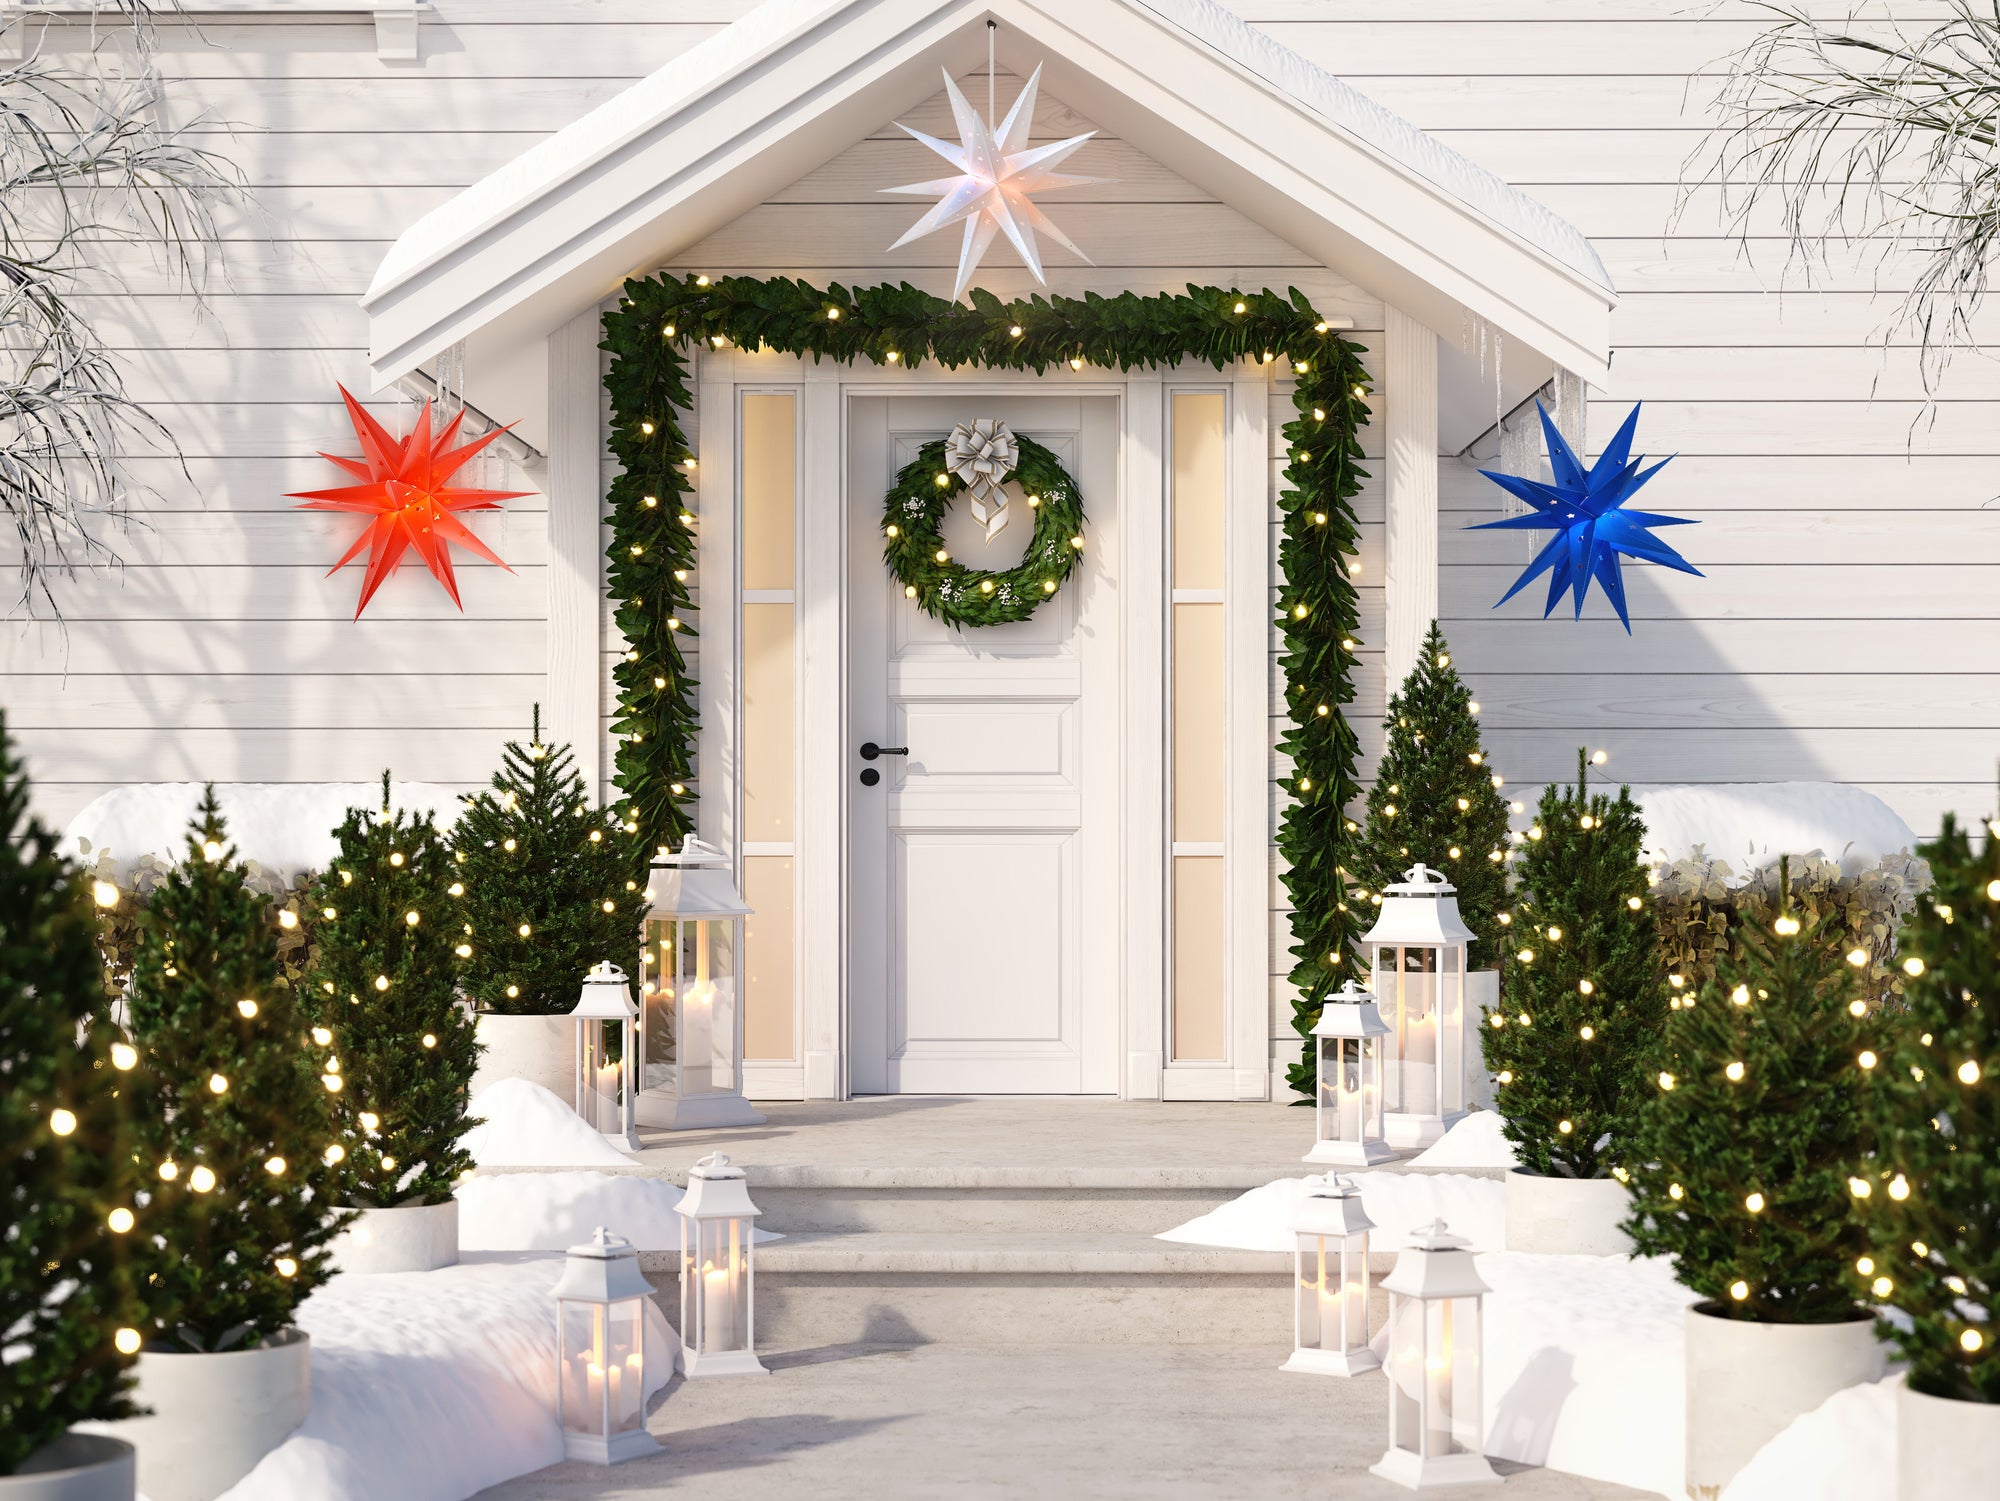 4th of July 3-Pack Moravian Weatherproof Star Lantern Lamps, Hanging Decoration, 1x Red, 1x White, 1x Blue (Shades Only)